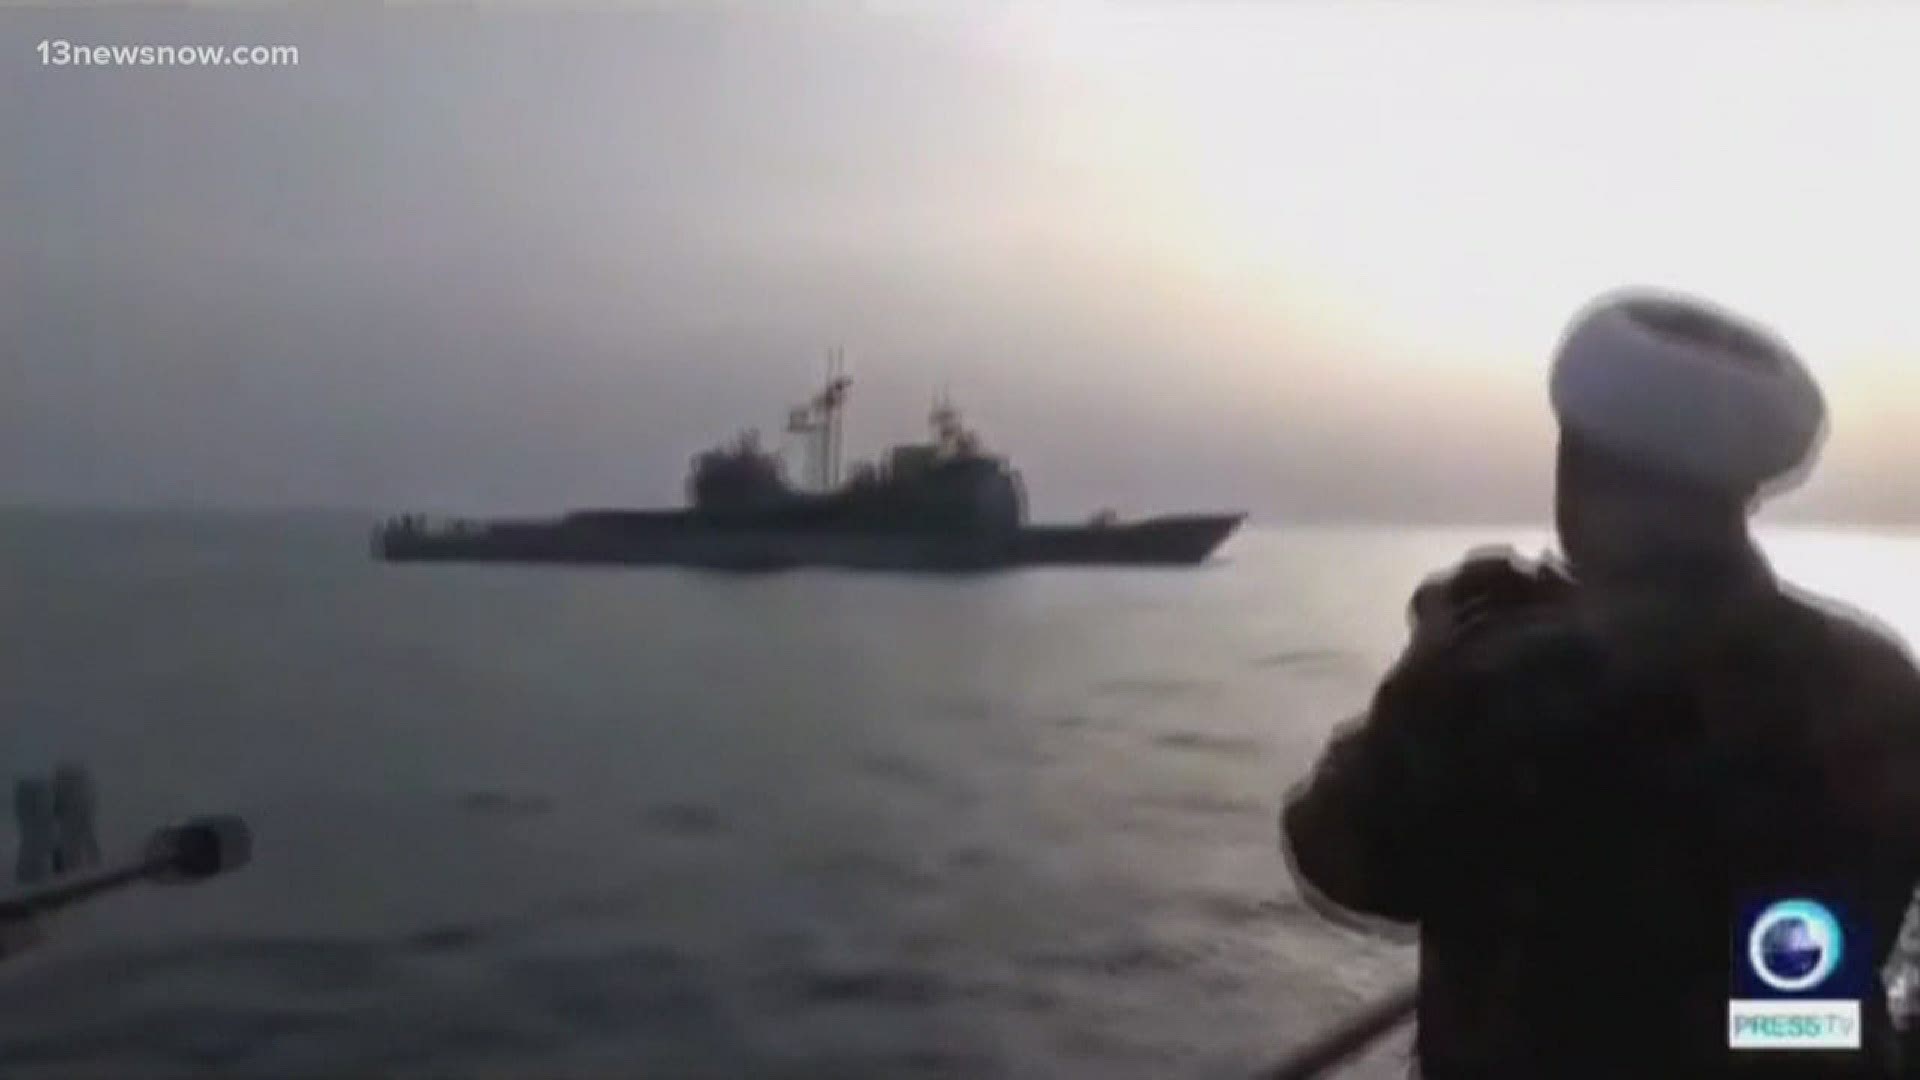 President Trump gave the Navy orders against any Iranian boats that harass them.